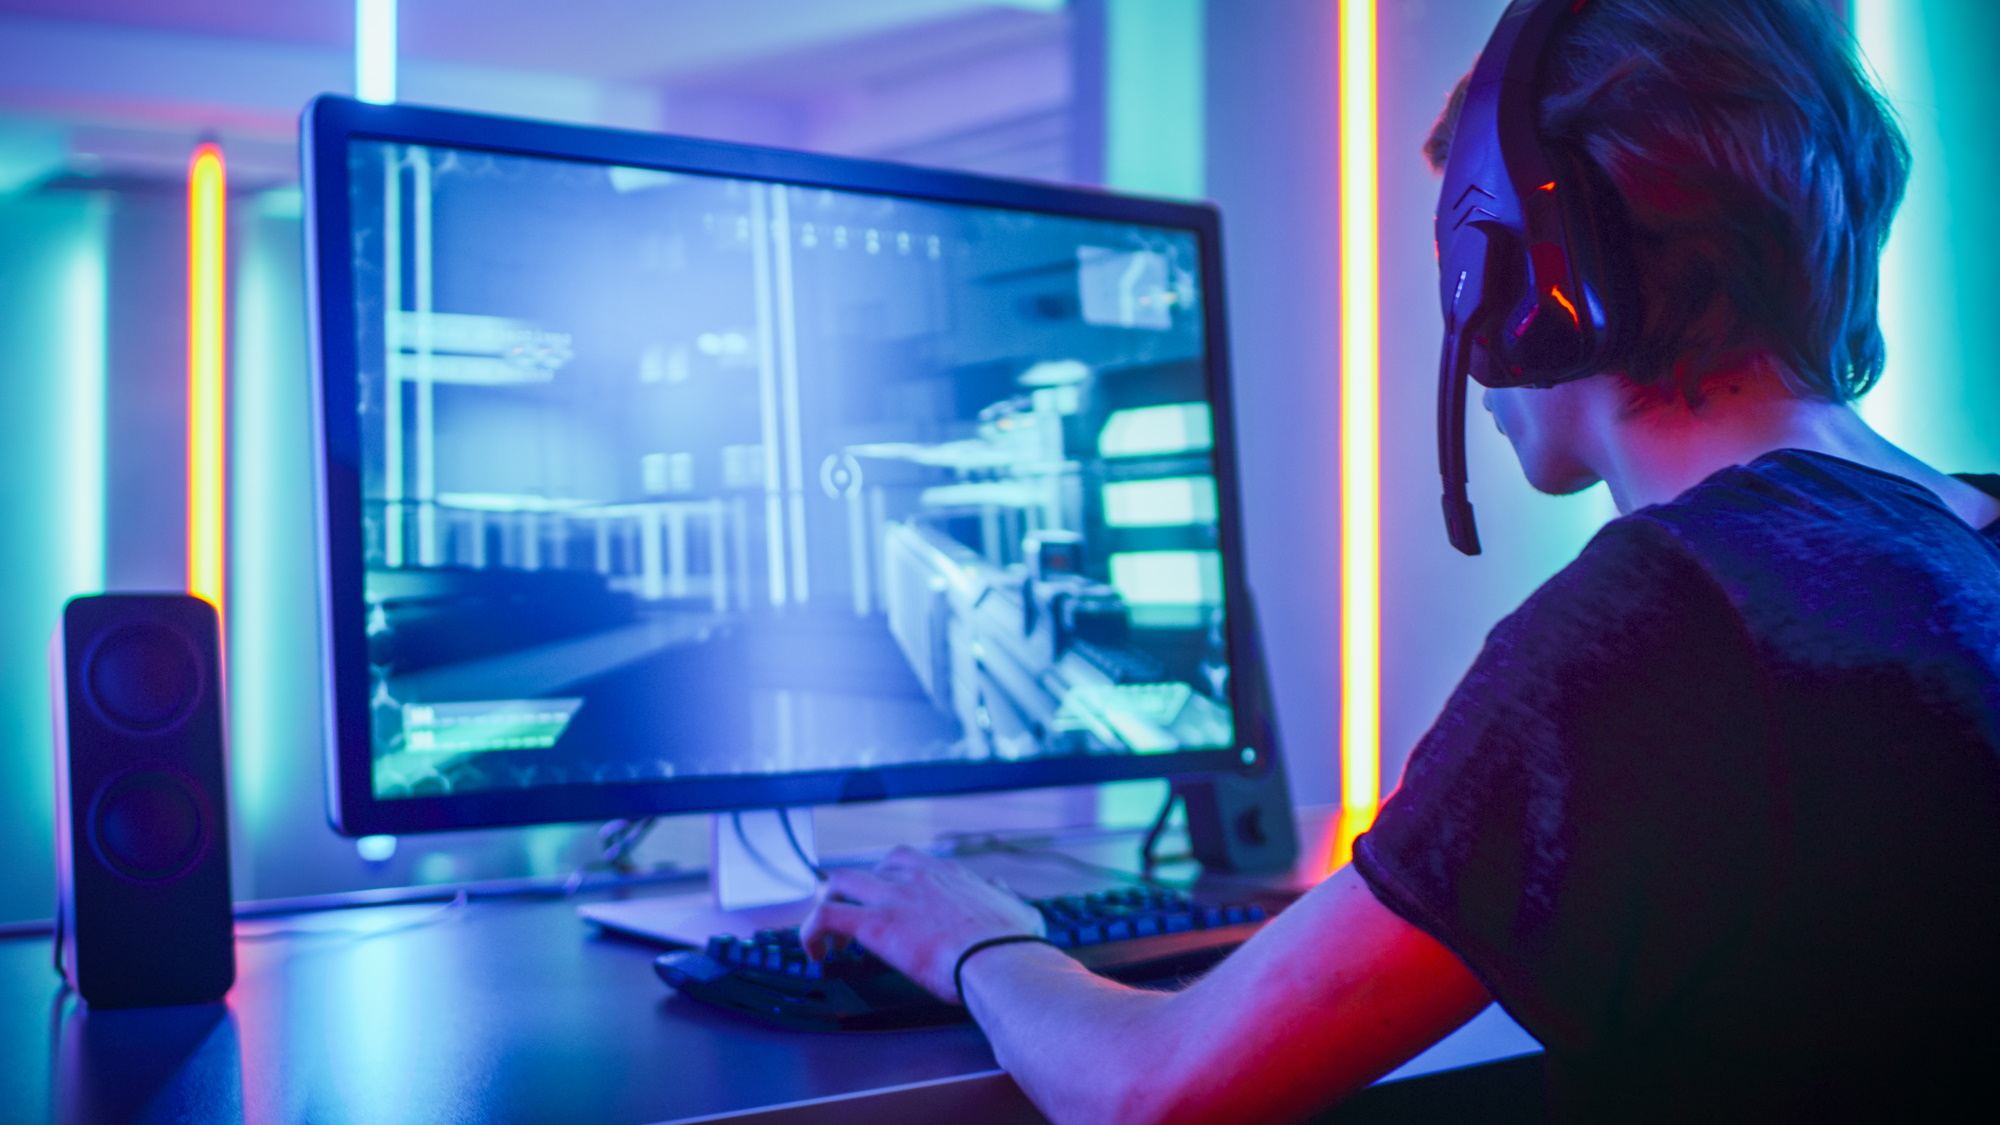 5 Best Free VPNs for Gaming in 2023 — Fast With No Lags